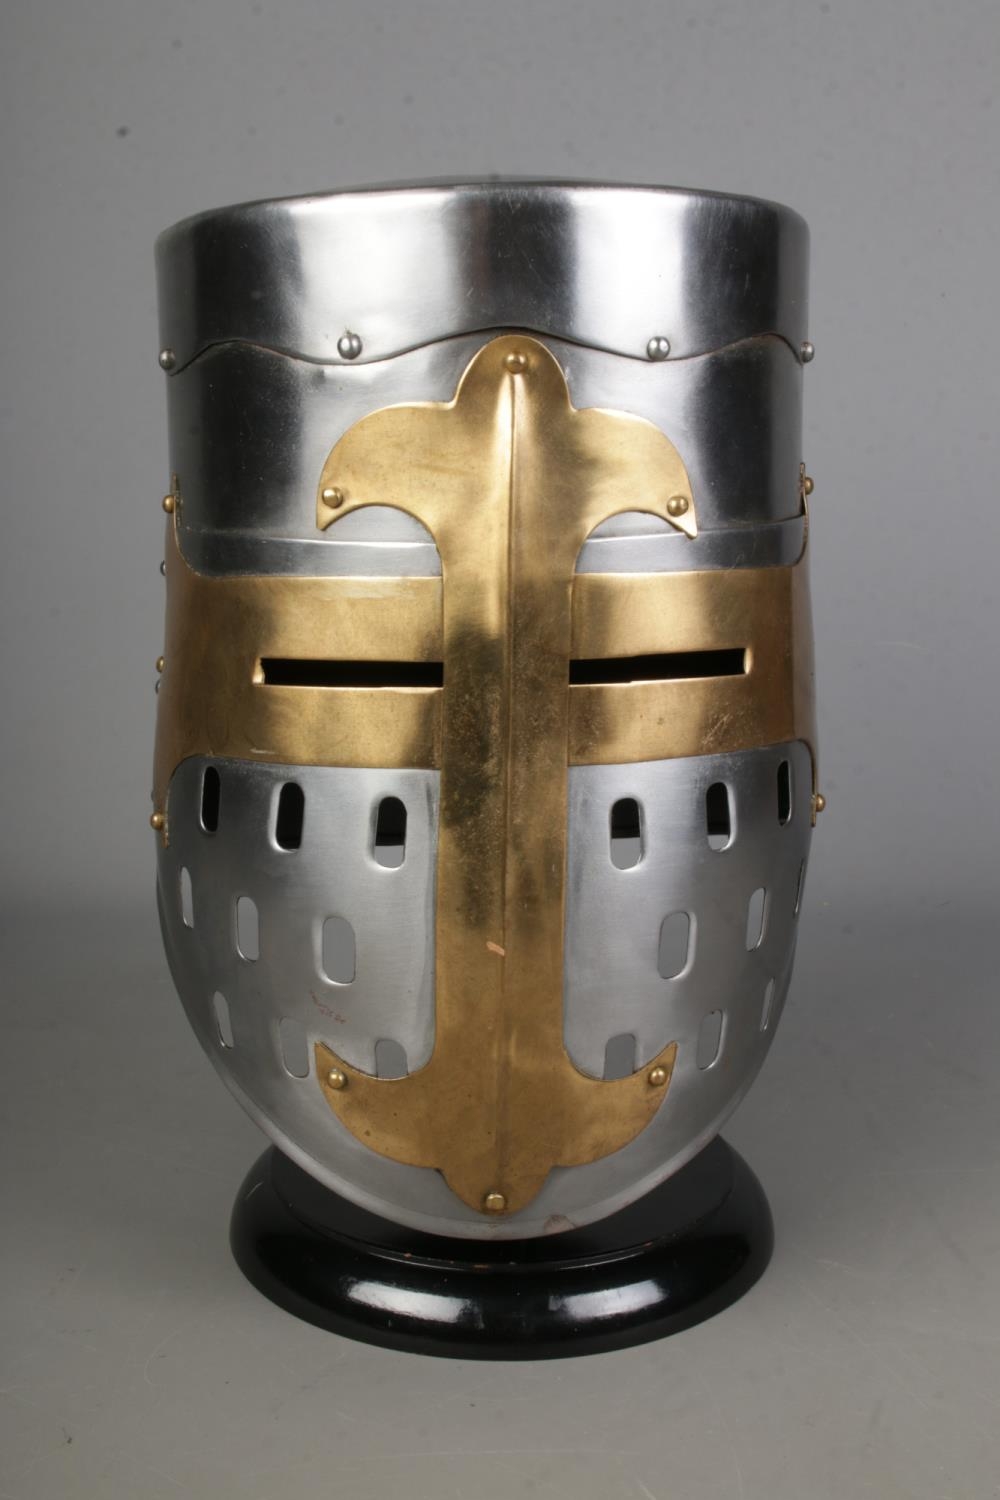 A replica medieval helmet on black display stand, life size model. - Image 2 of 2